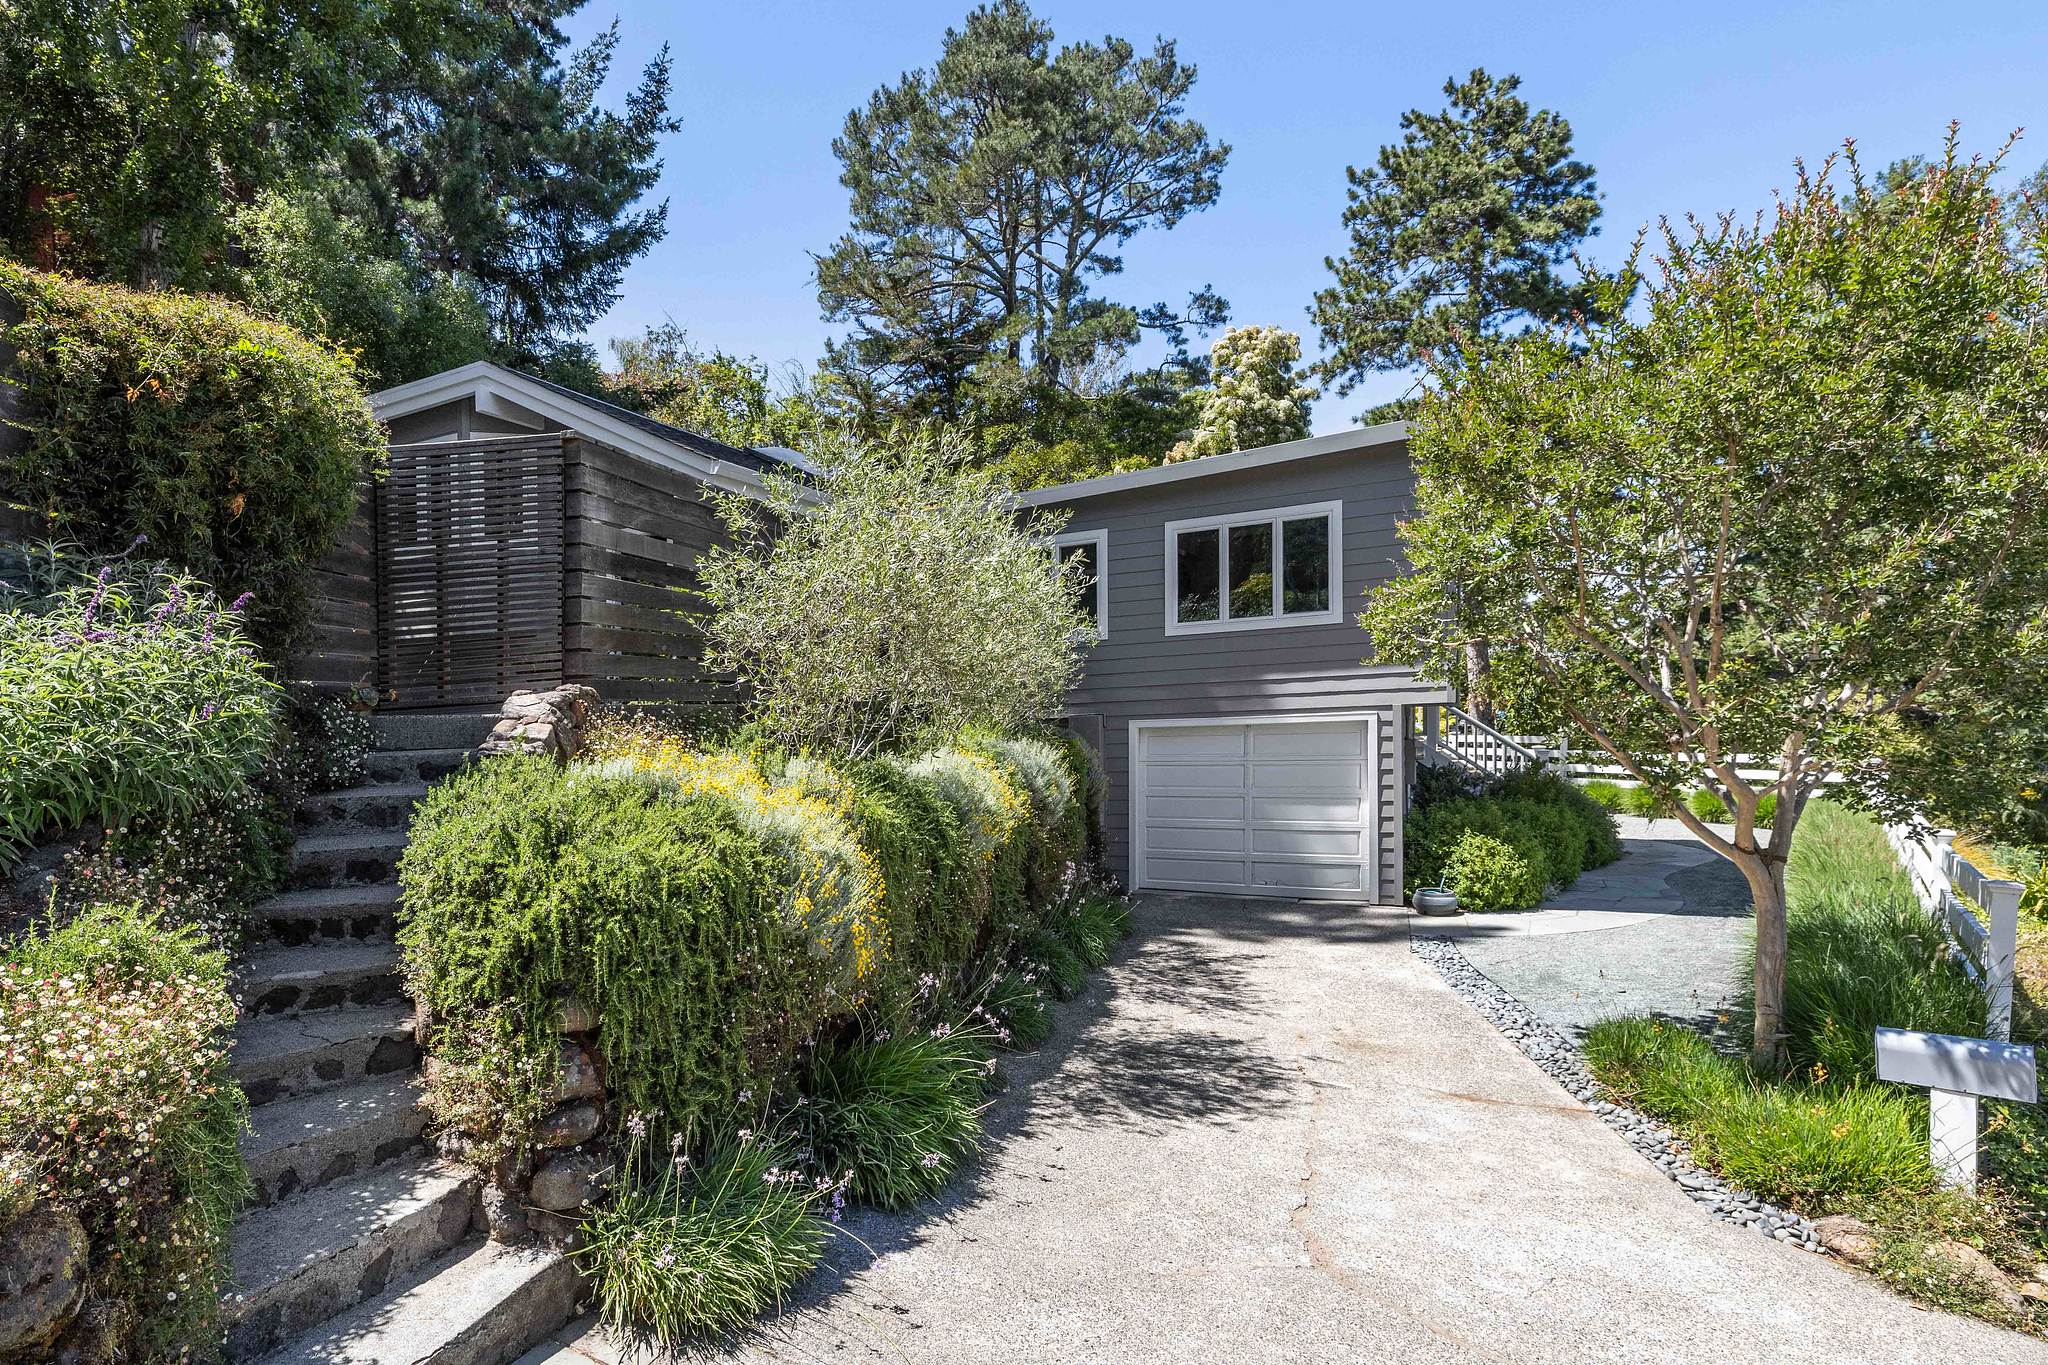 Front exterior view of 473 Montecito Drive, Corte Madera, showing a home with grey facade